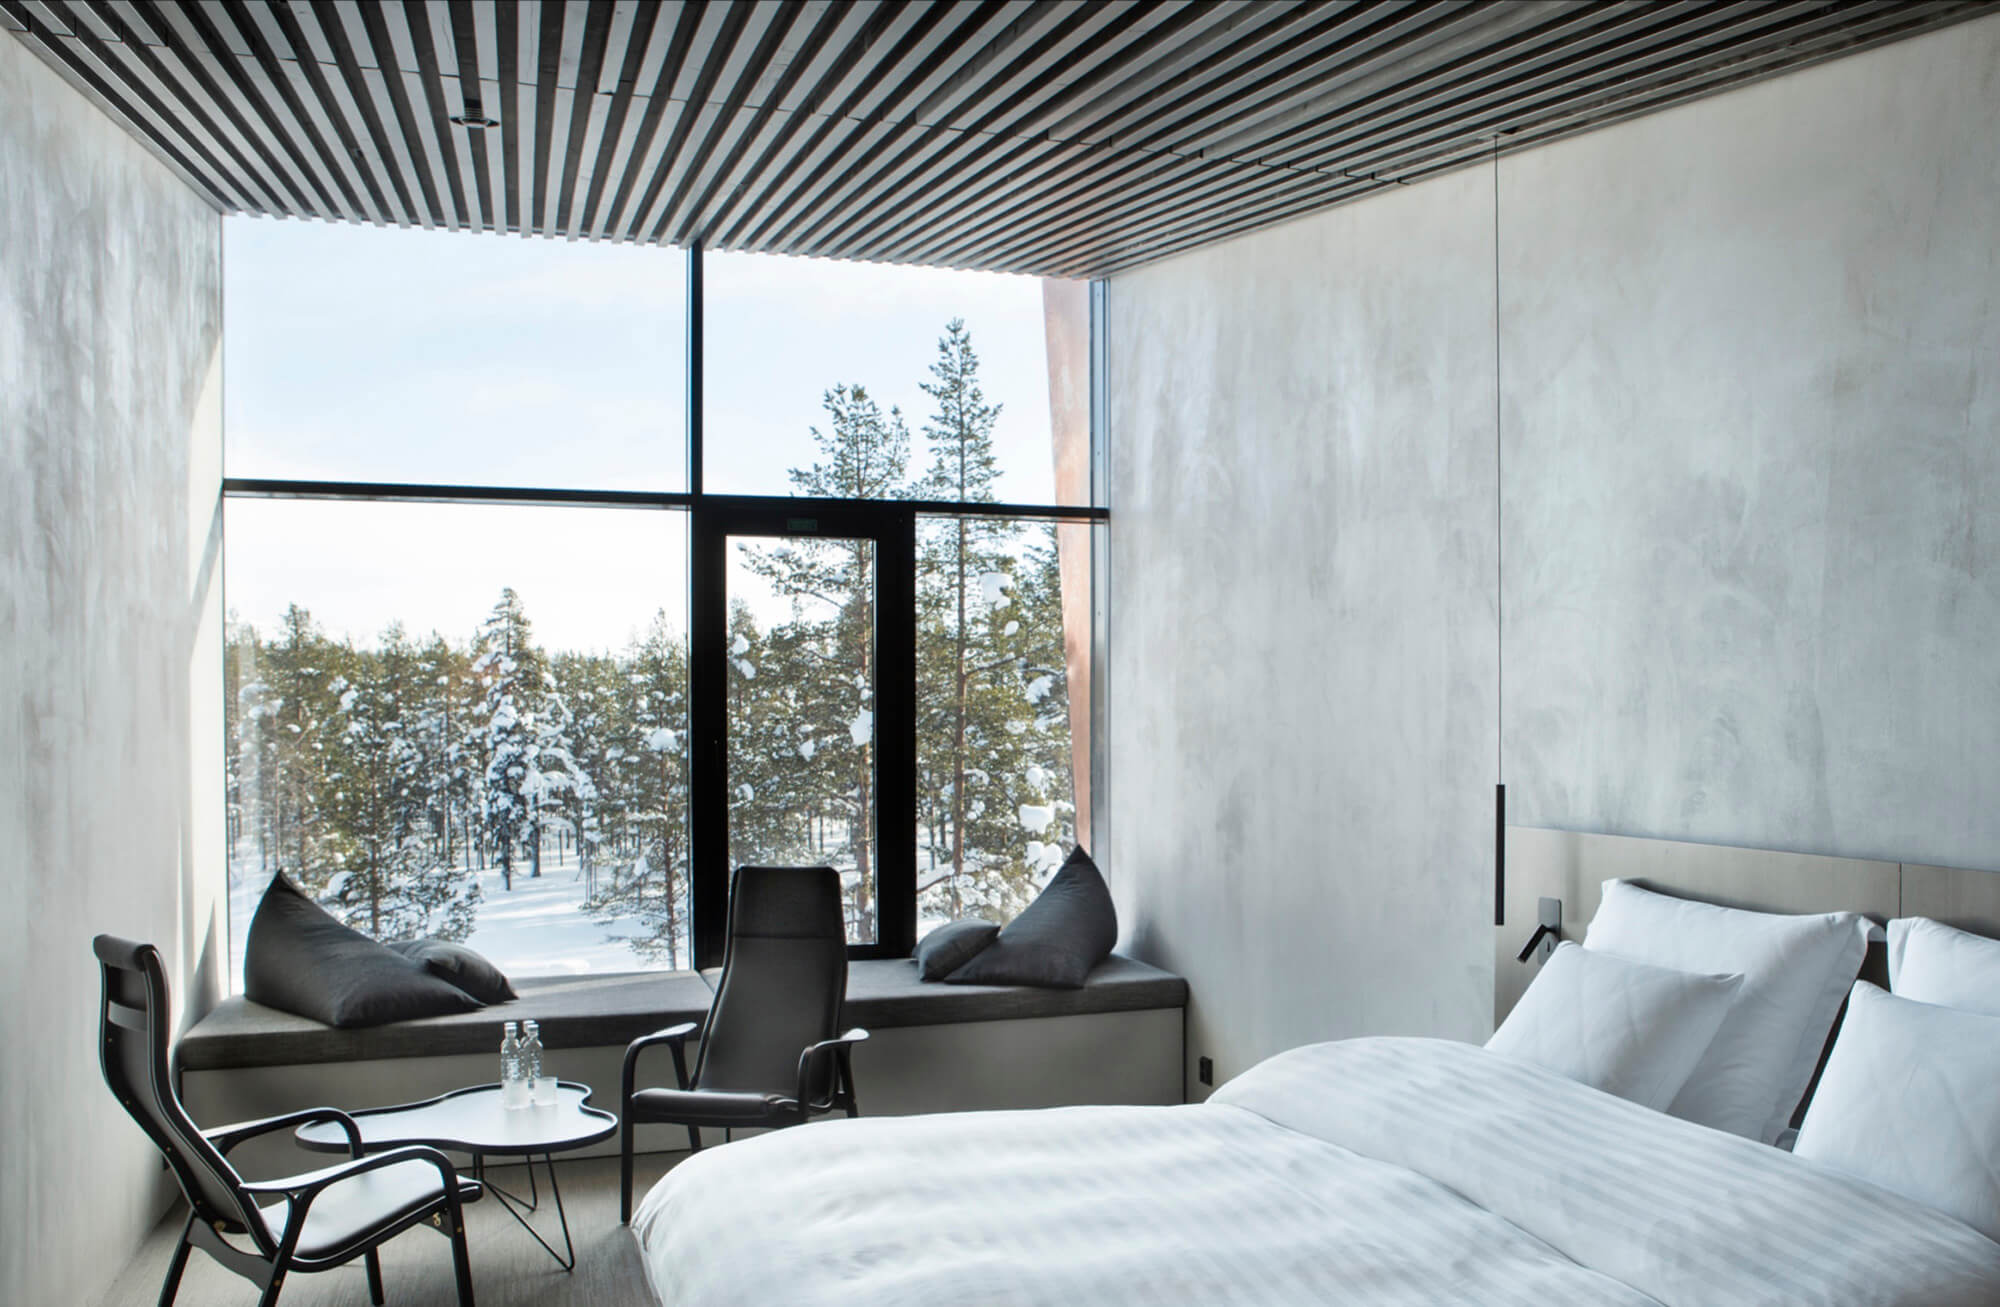 Accommodation in scandi chic rooms and suites – a scenery from one of our SkyView Suites.